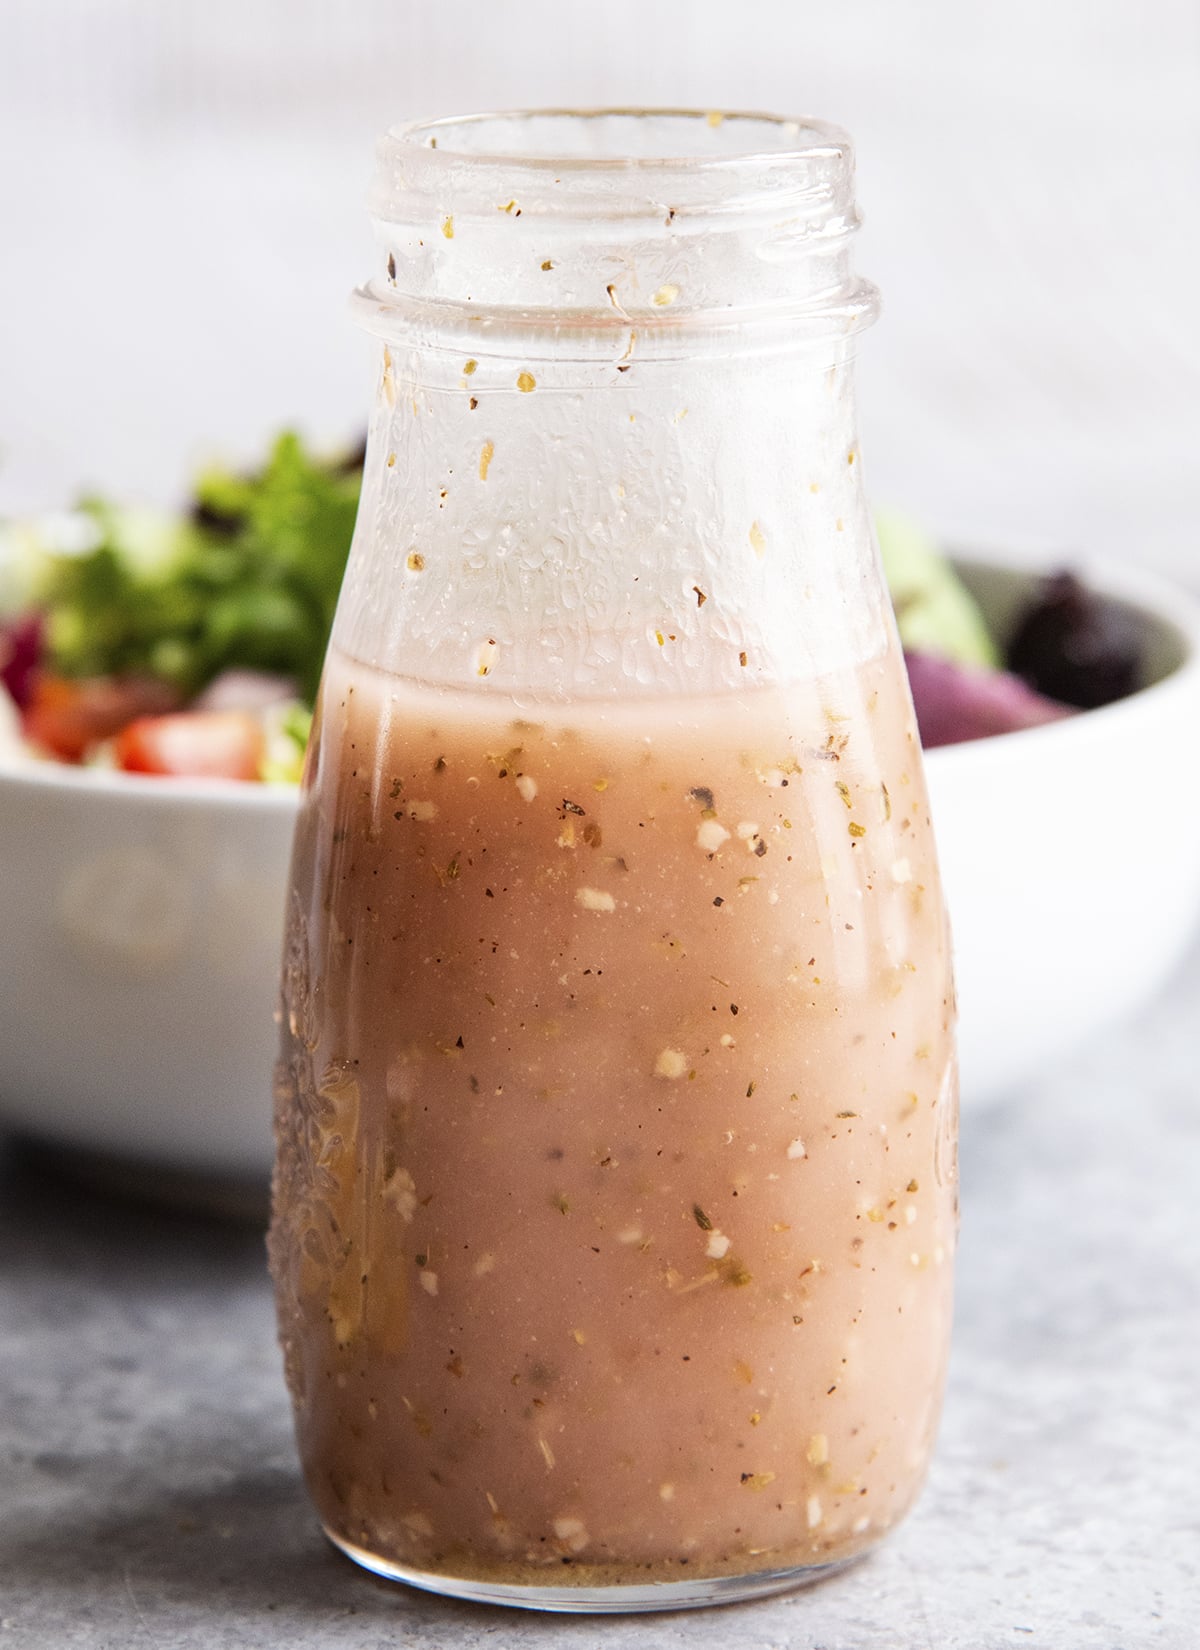 A close up of a bottle of red wine vinaigrette dressing in front of a bowl of salad.